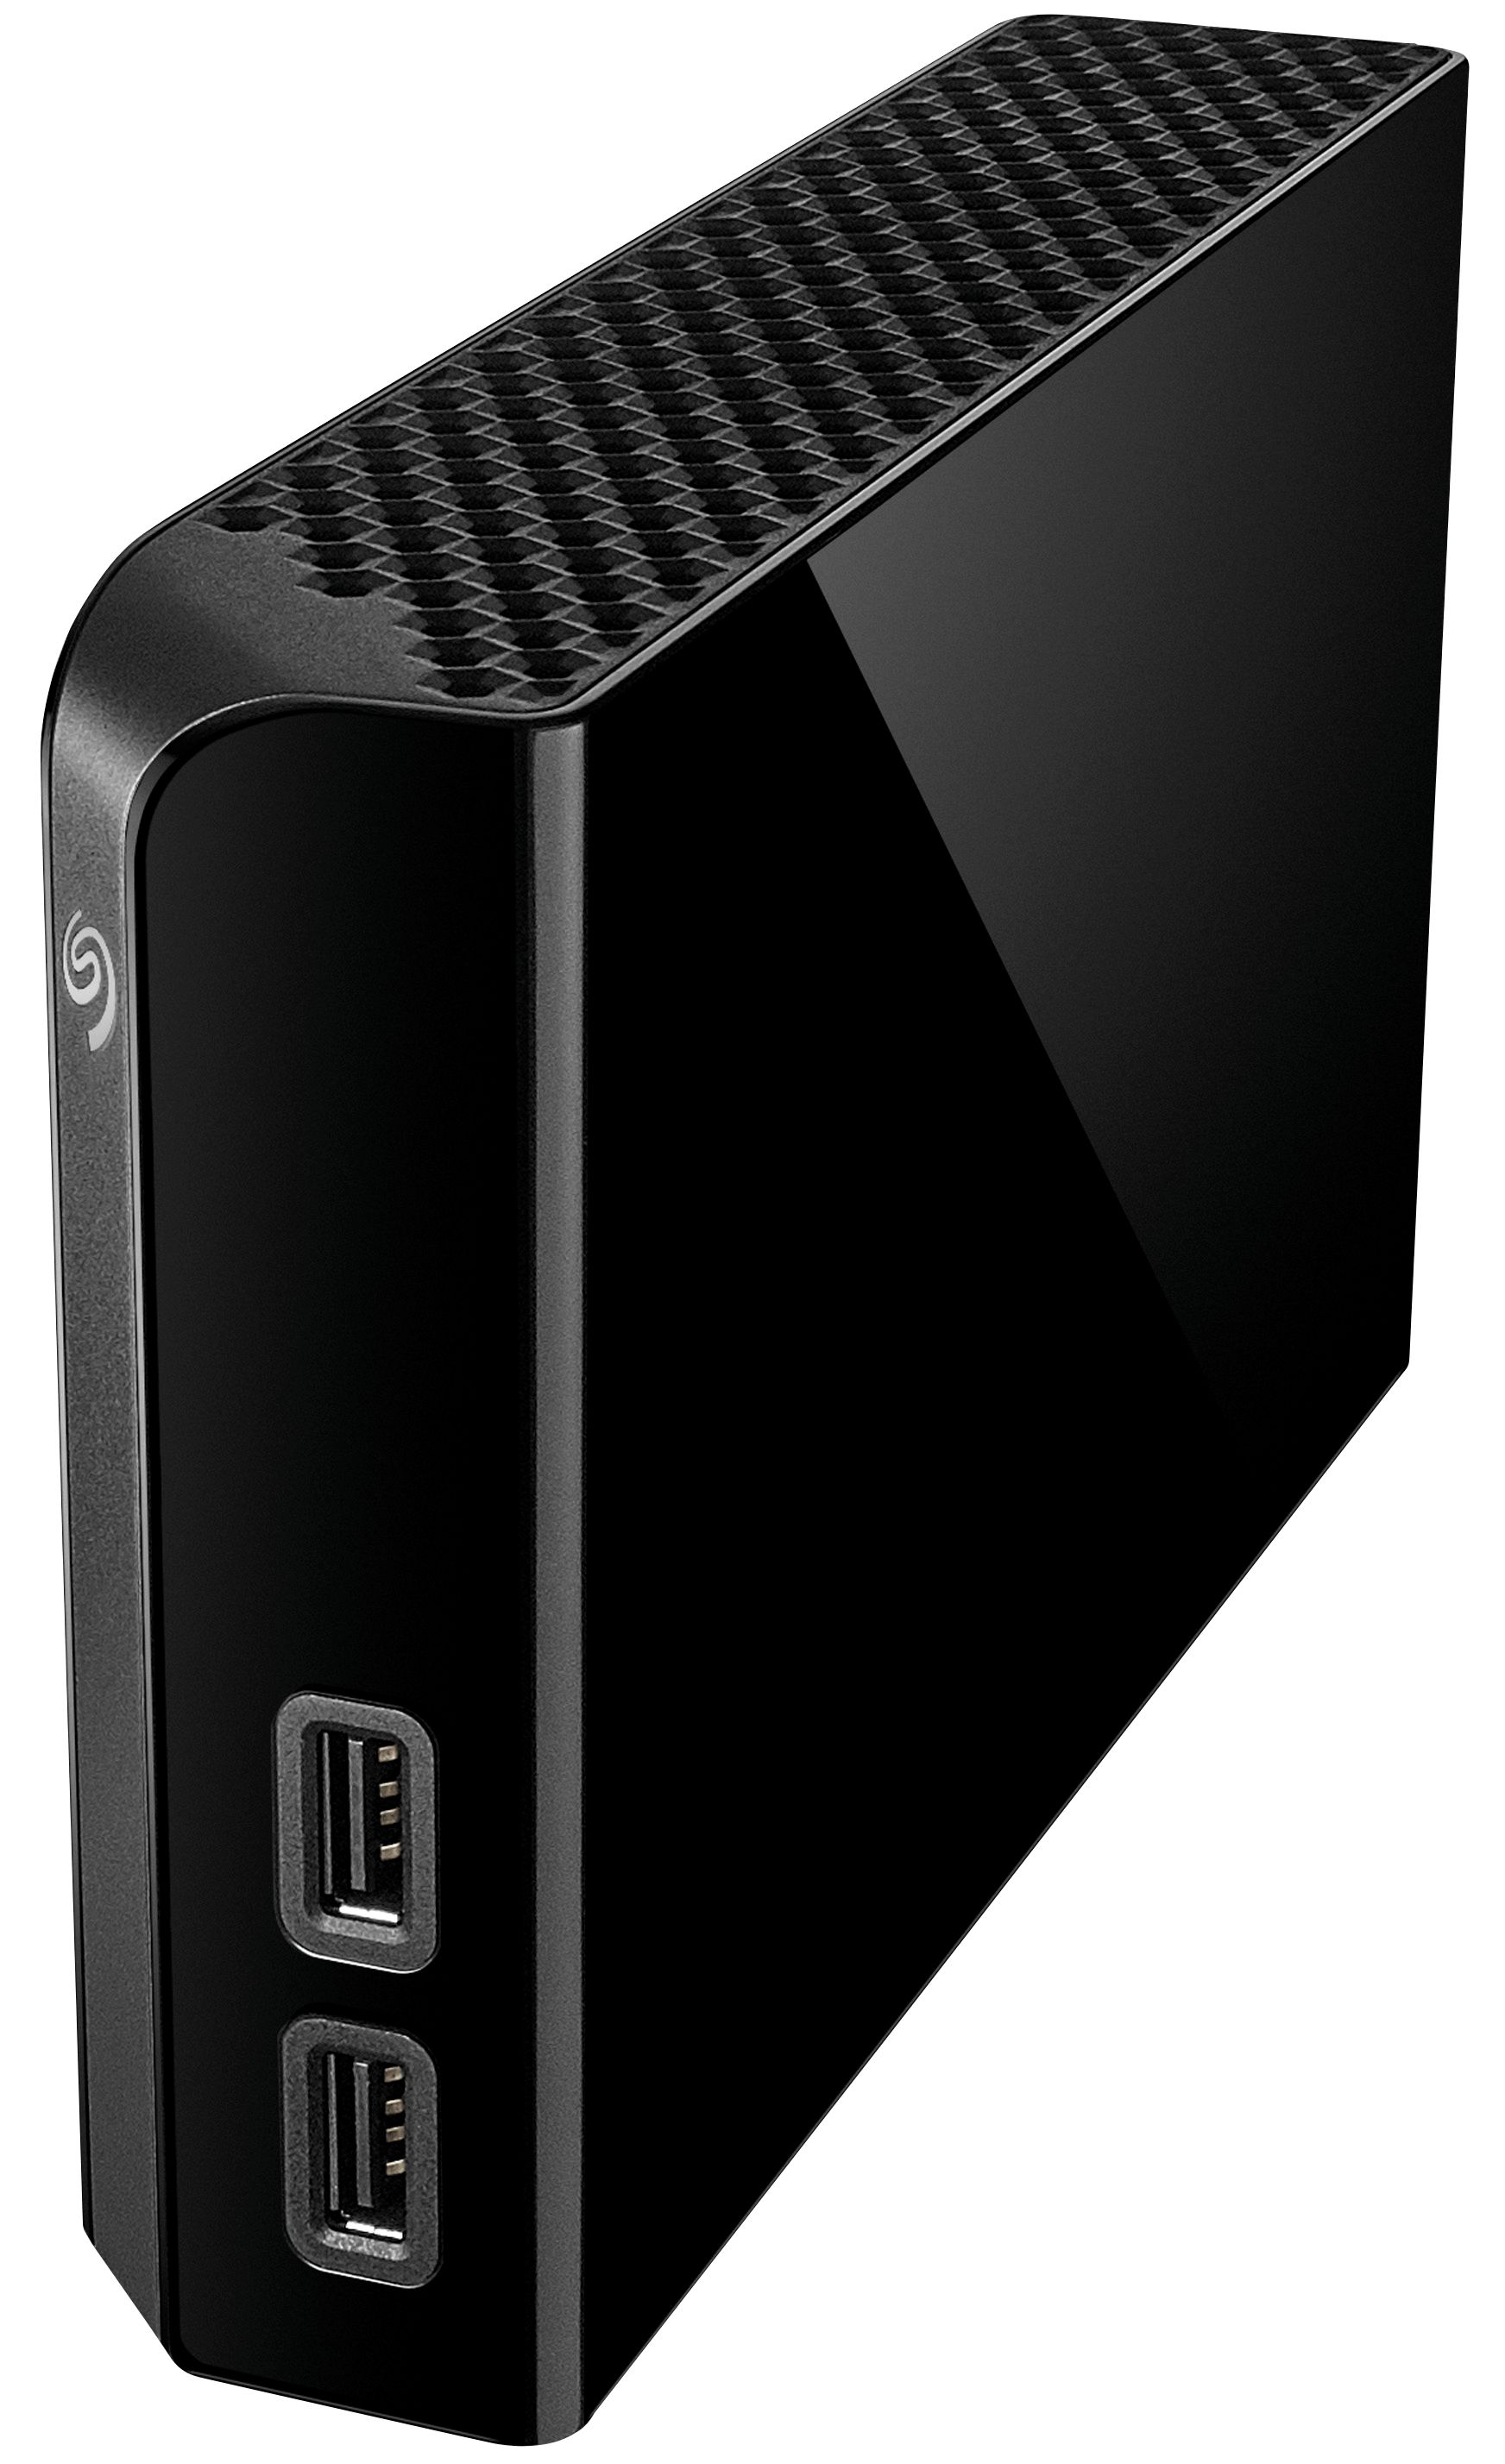 format desktop drive seagate for windows and mac